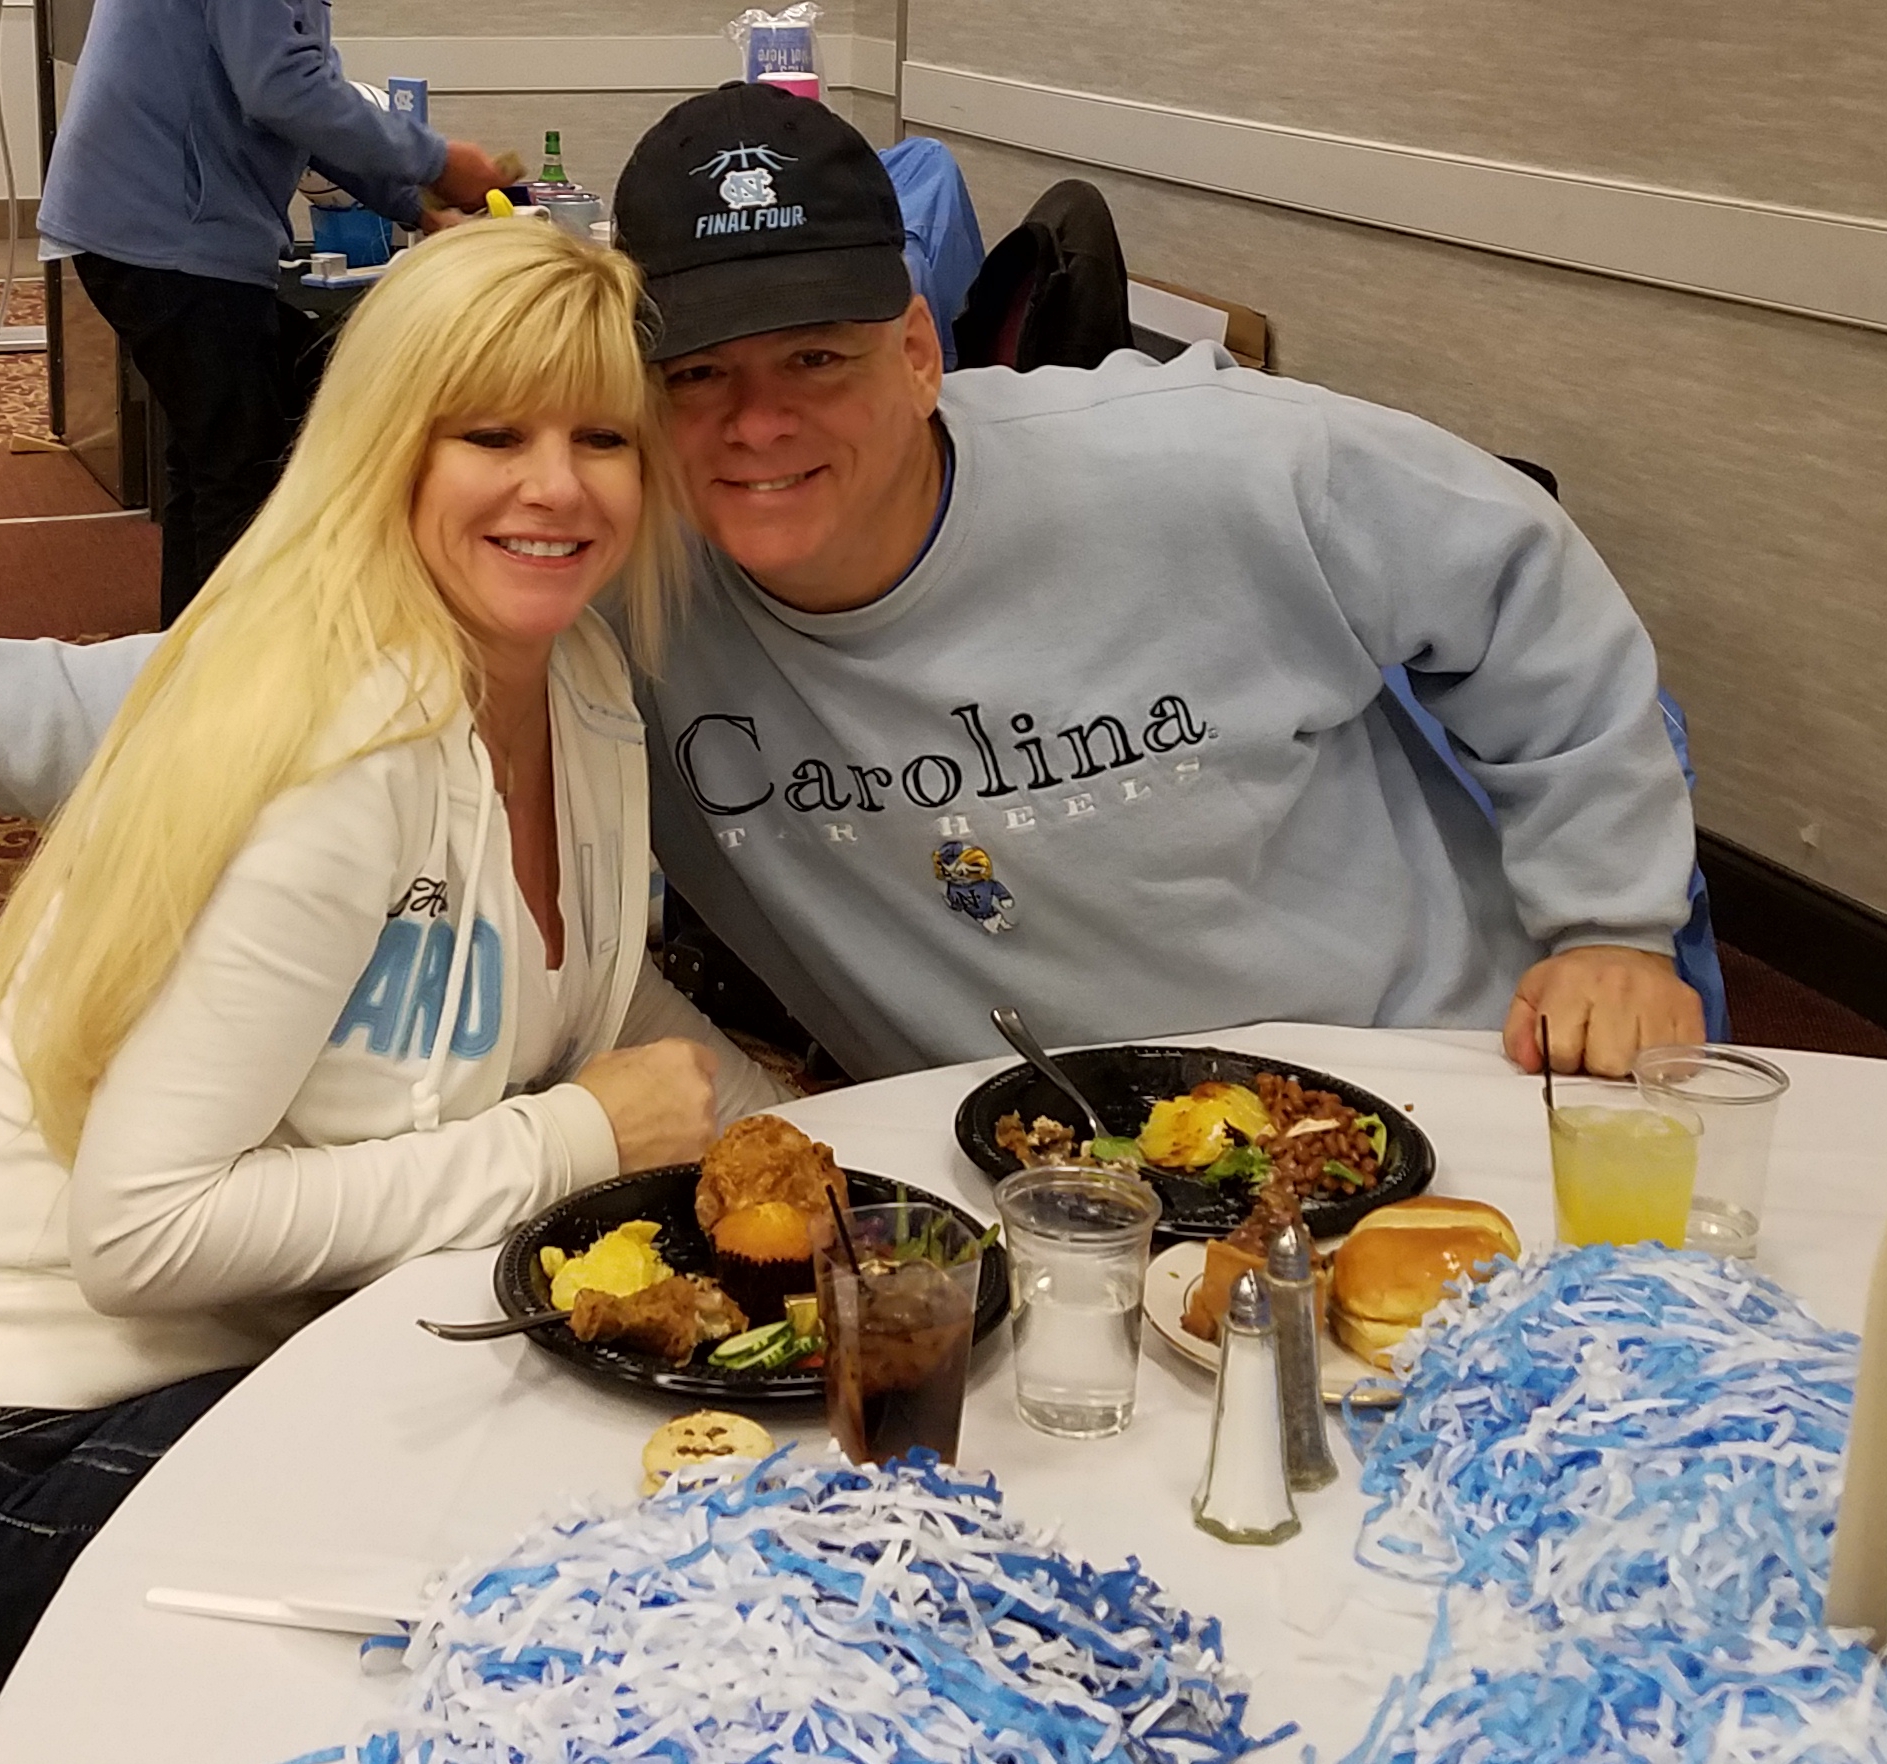 Rain, Sleet nor Snow will keep the Jacksonville Carolina Club from supporting our Tar Heels!